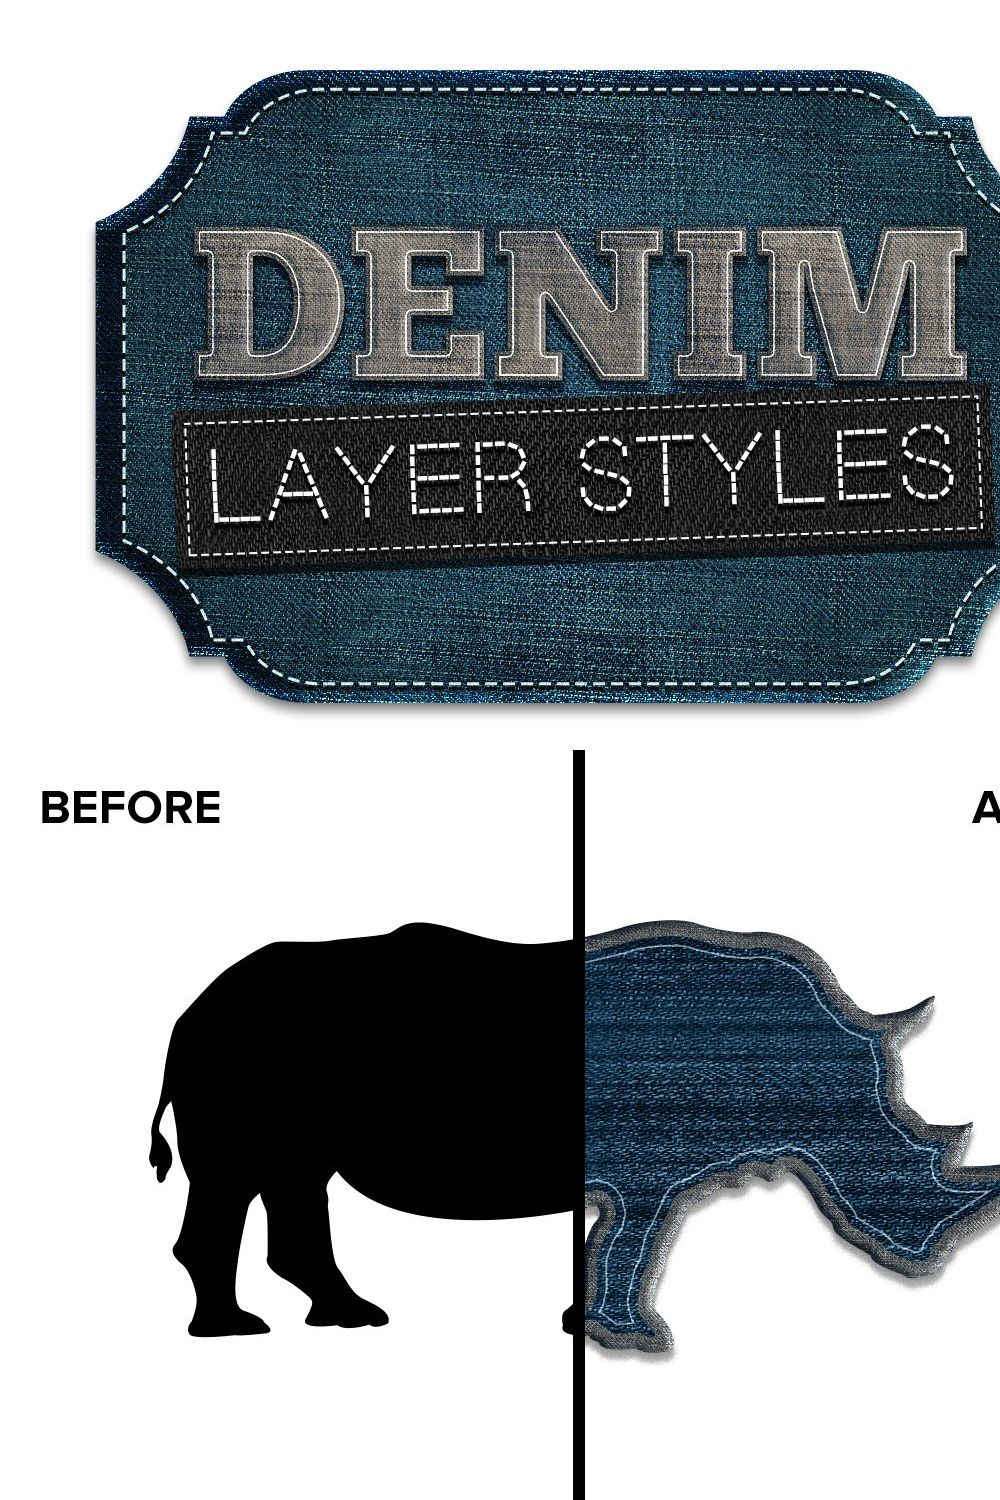 Denim Jeans Patch Layer Styles pinterest preview image.